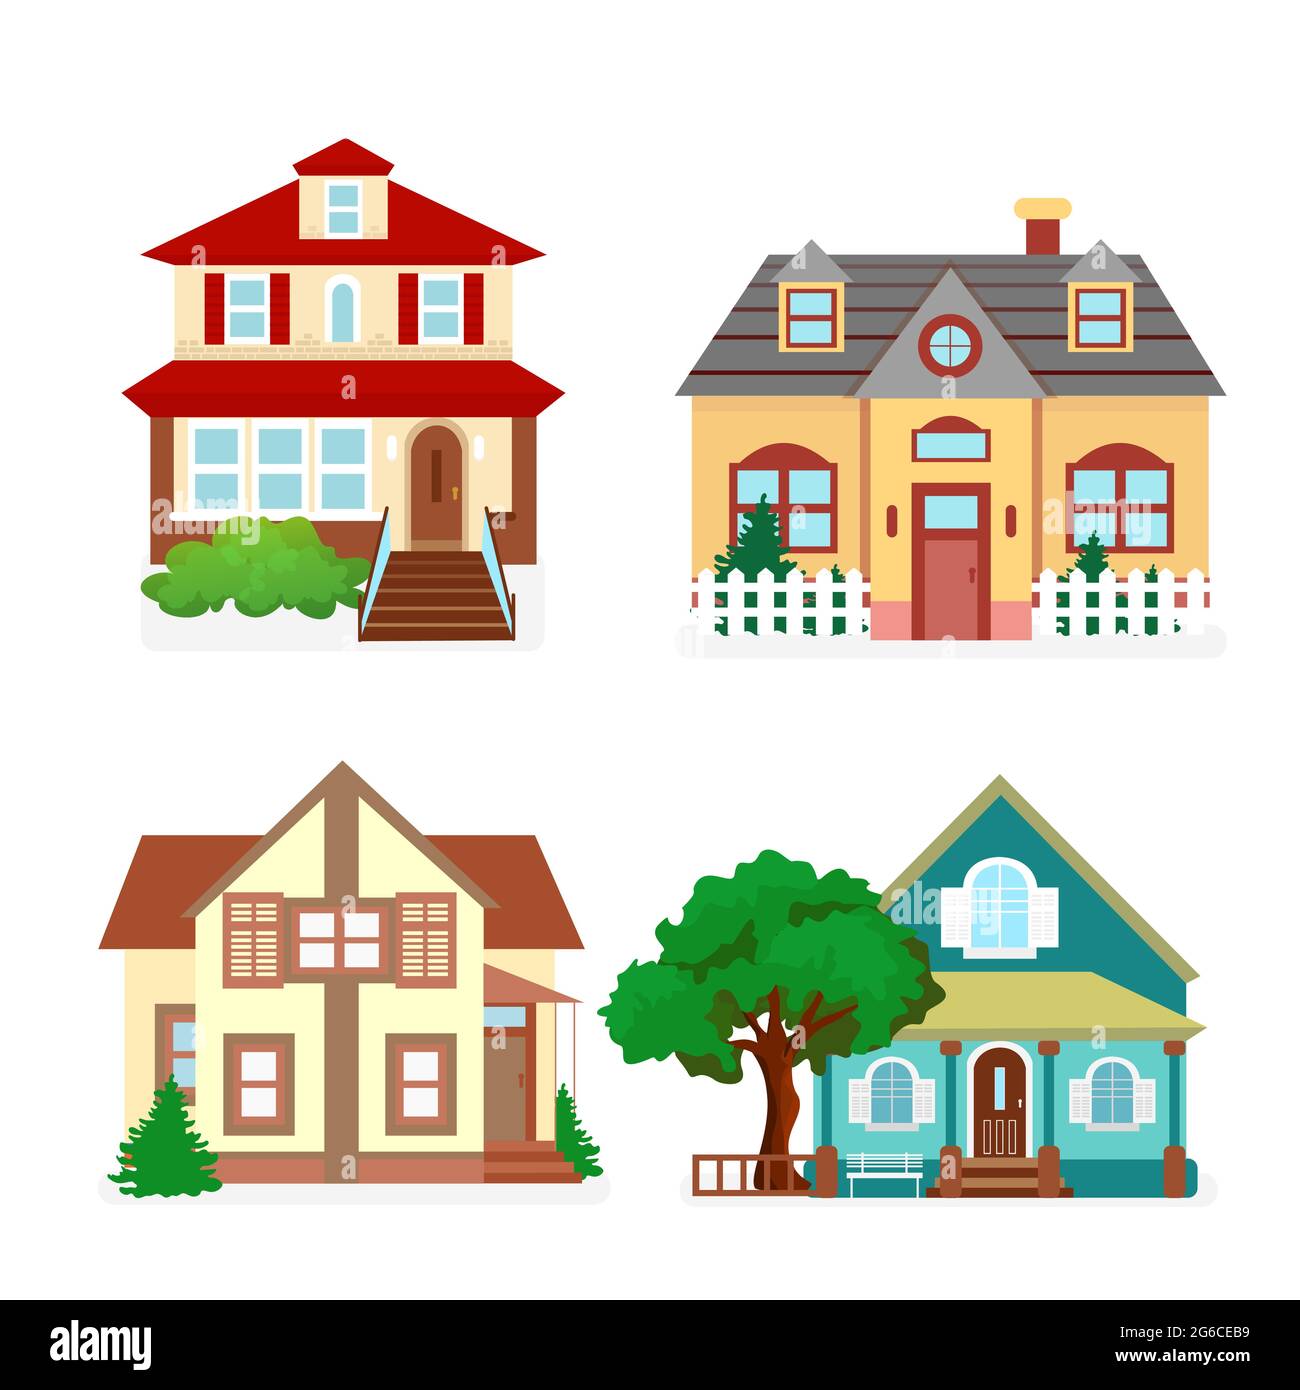 Vector illustration set of cute colorful houses. Country flat buildings in cartoon style. Stock Vector